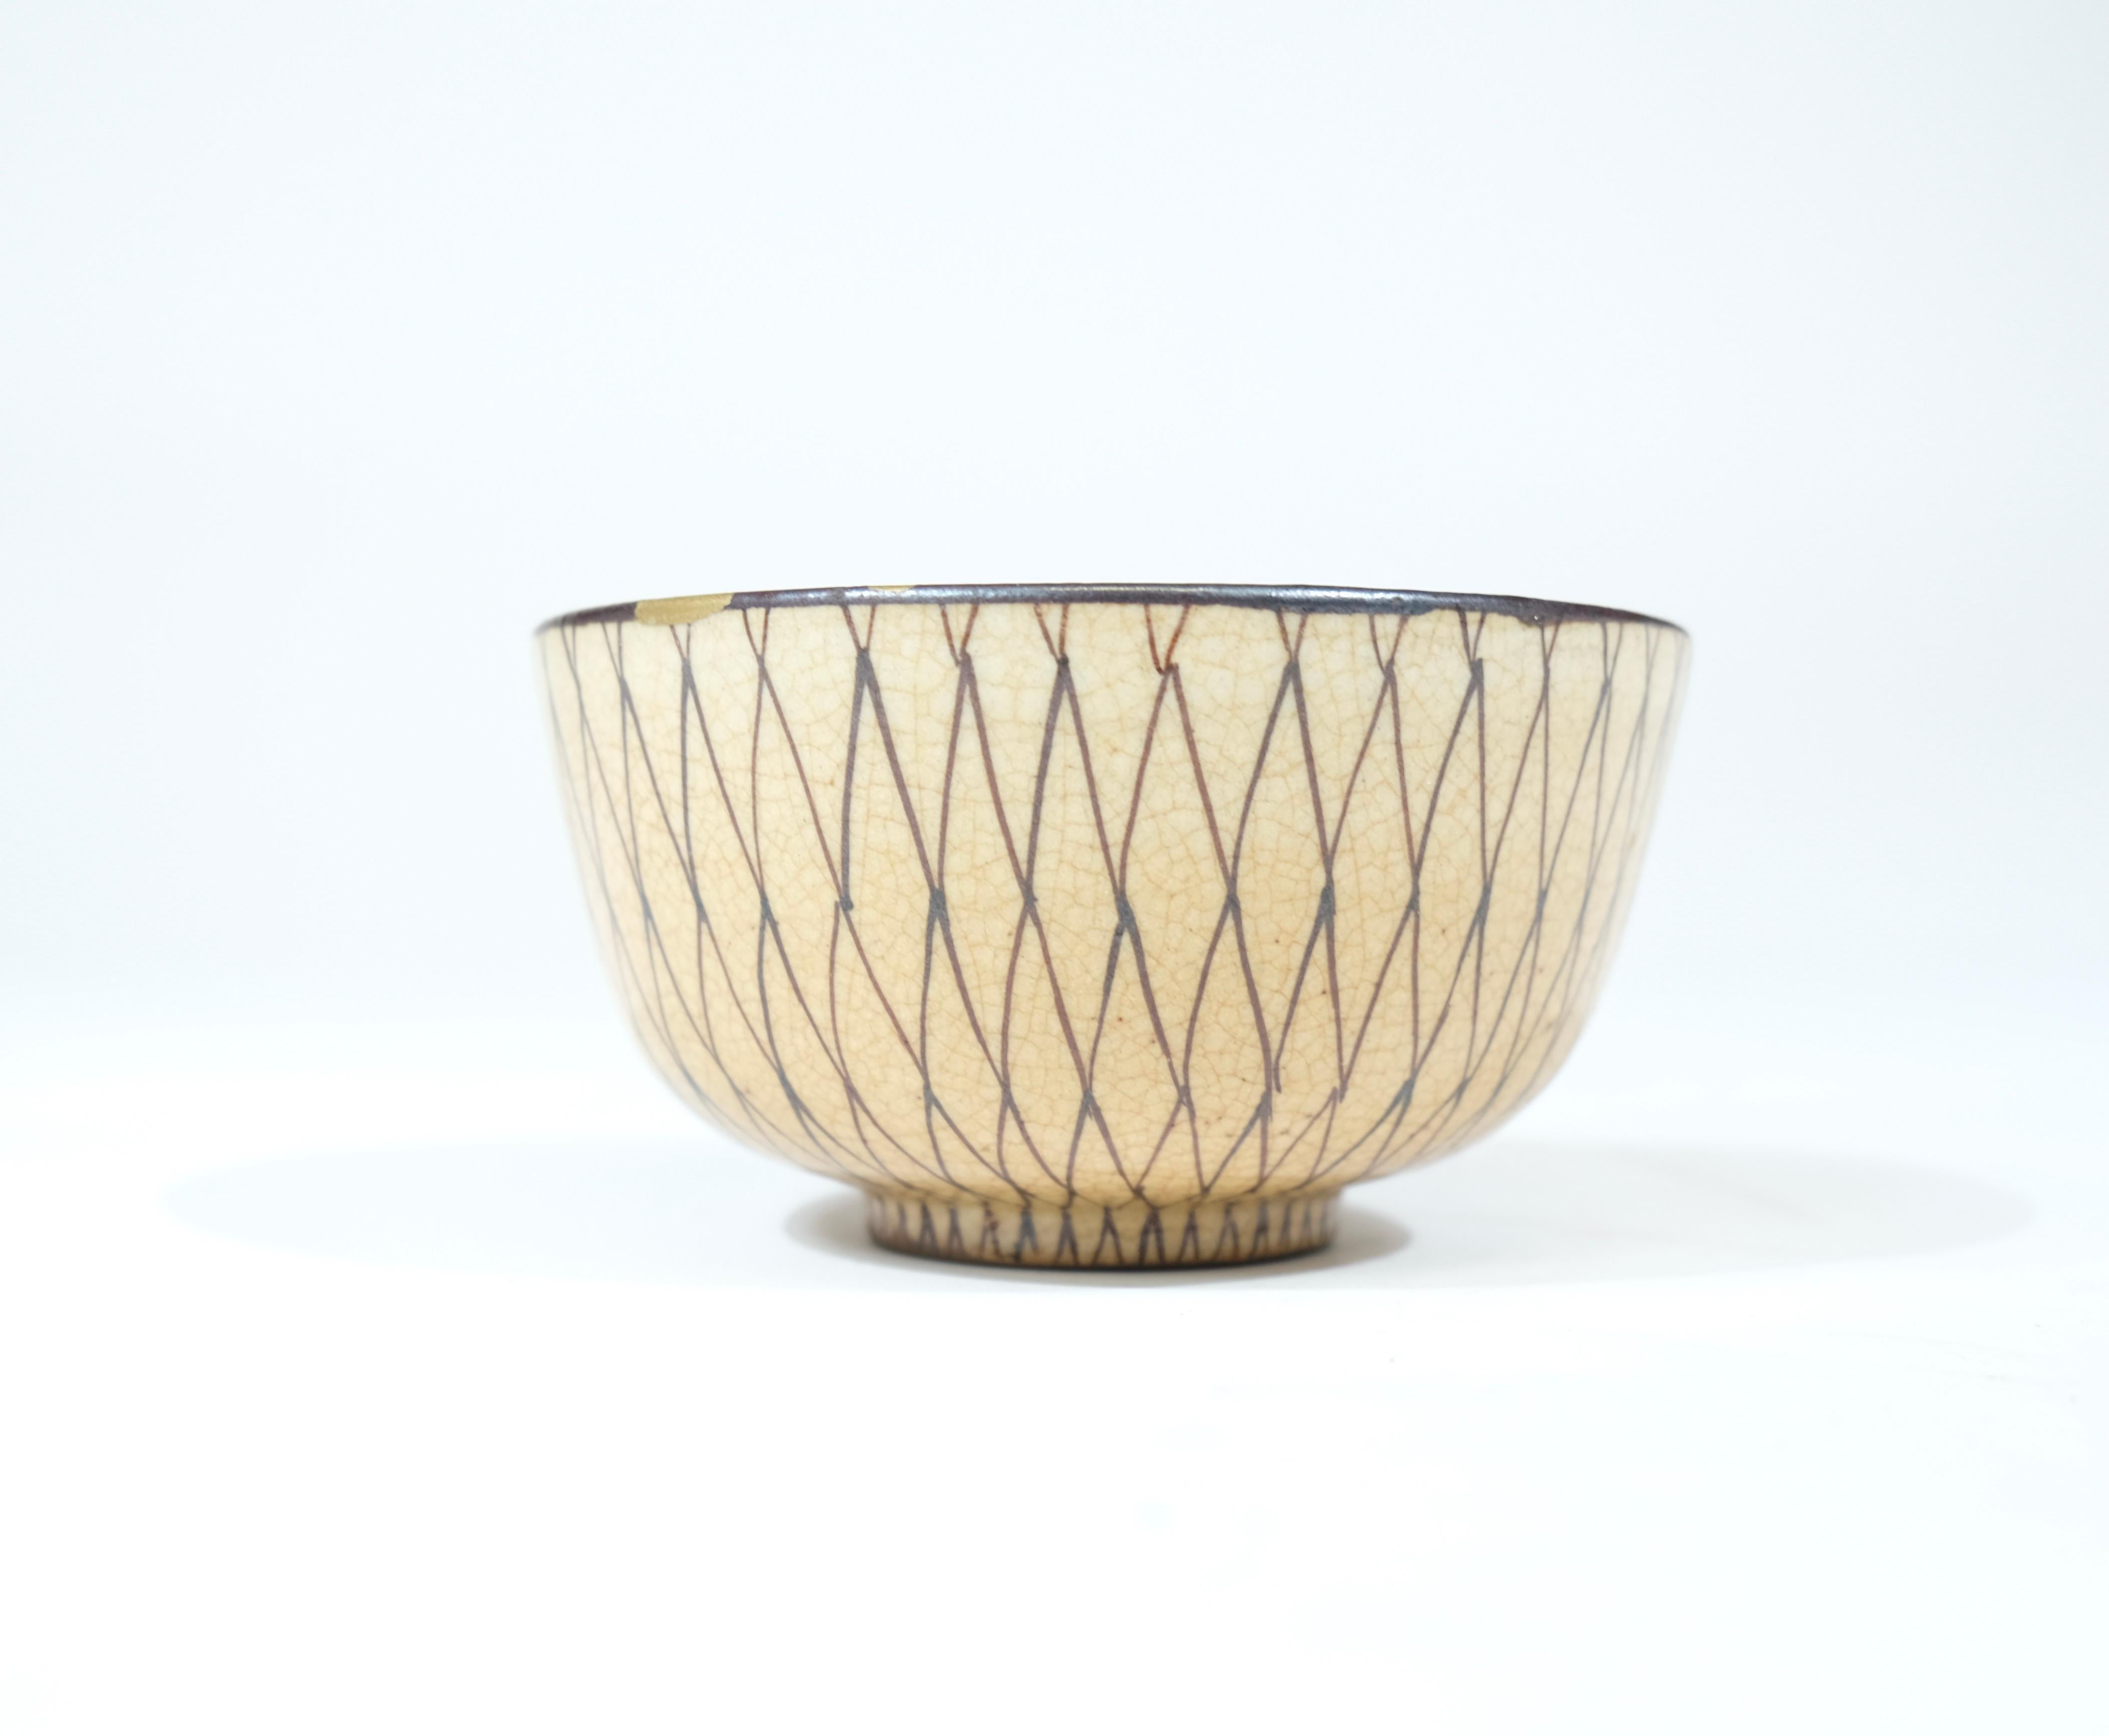 A charming Japanese tea bowl glazed in beige color with a pattern of a net on top. On the rim it has a few chips that have been overpainted with gilt color.